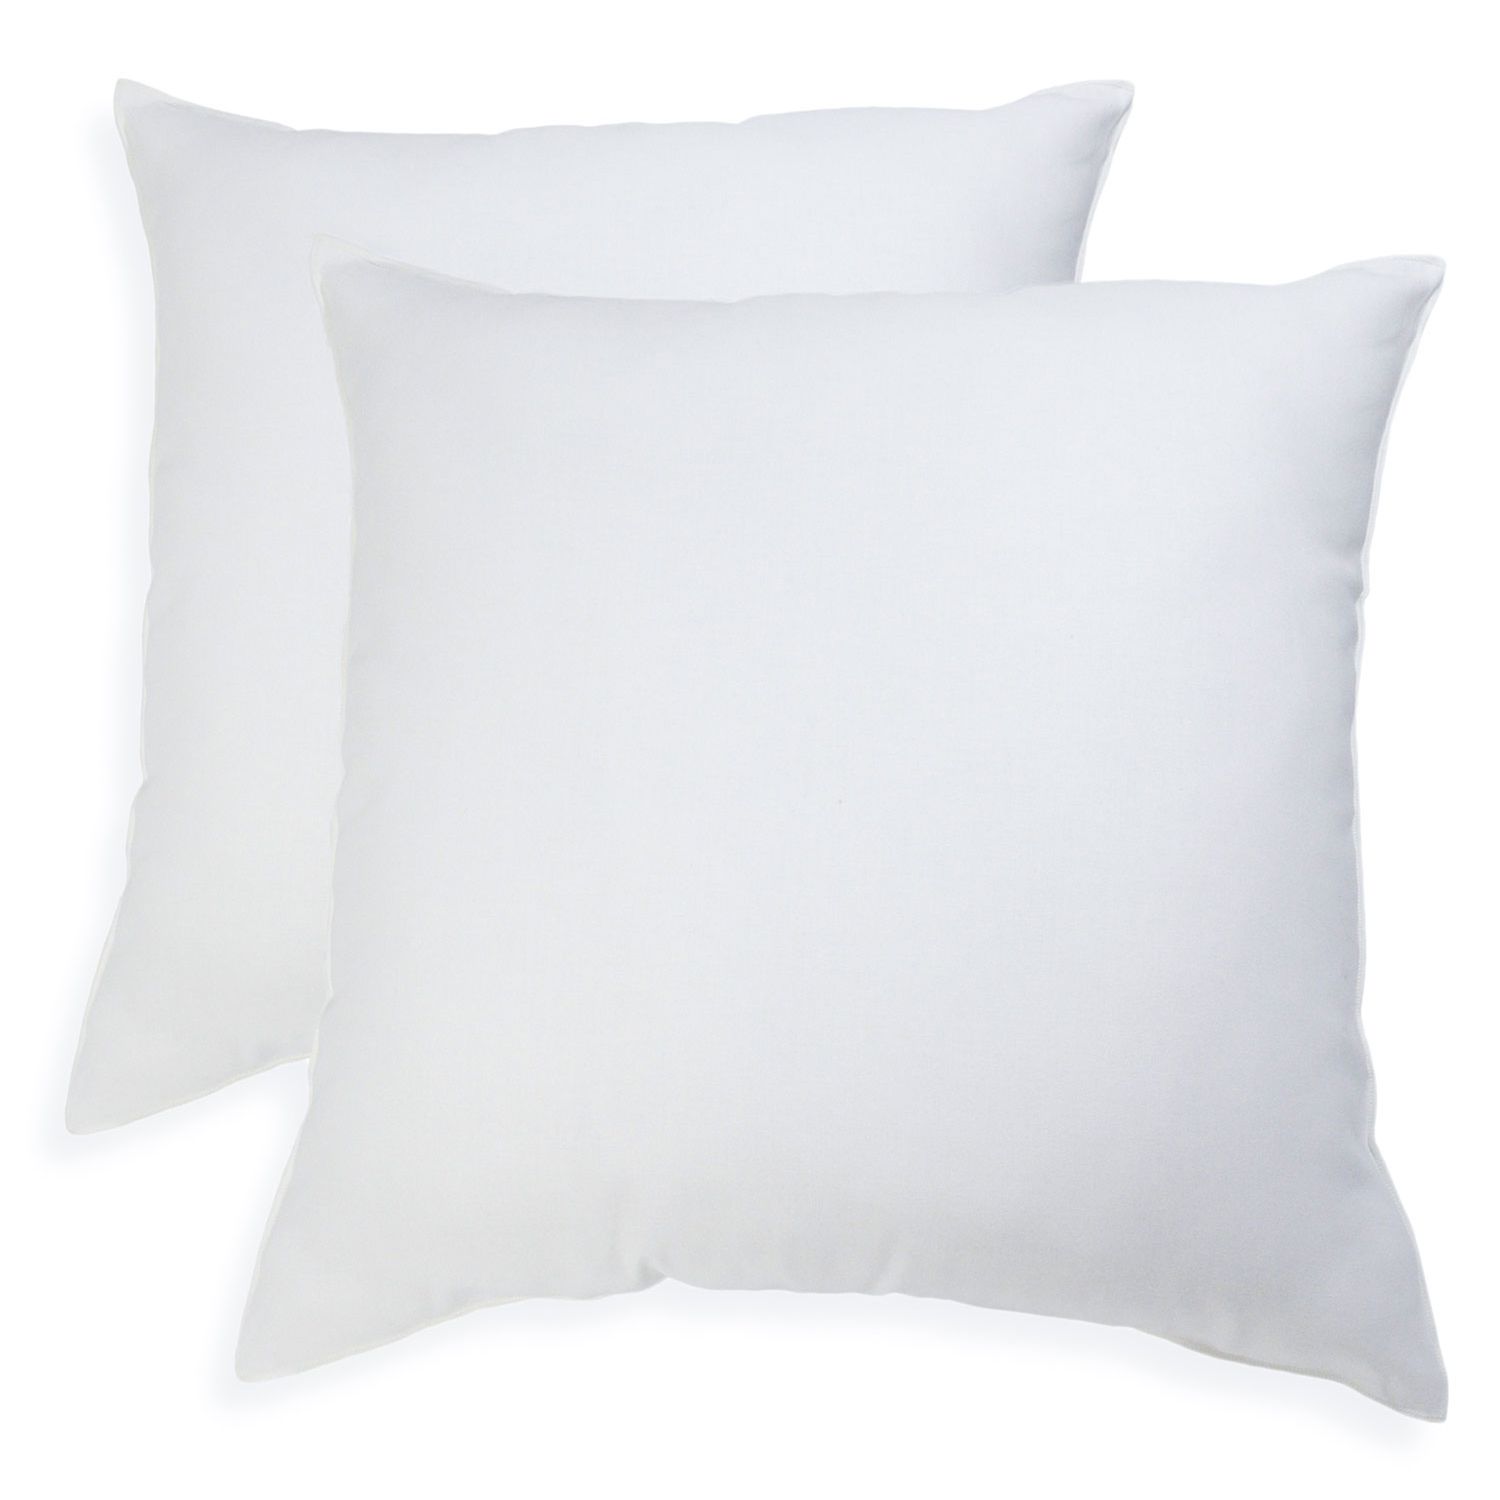 Iso-Pedic 2-pack Square Euro Pillows 